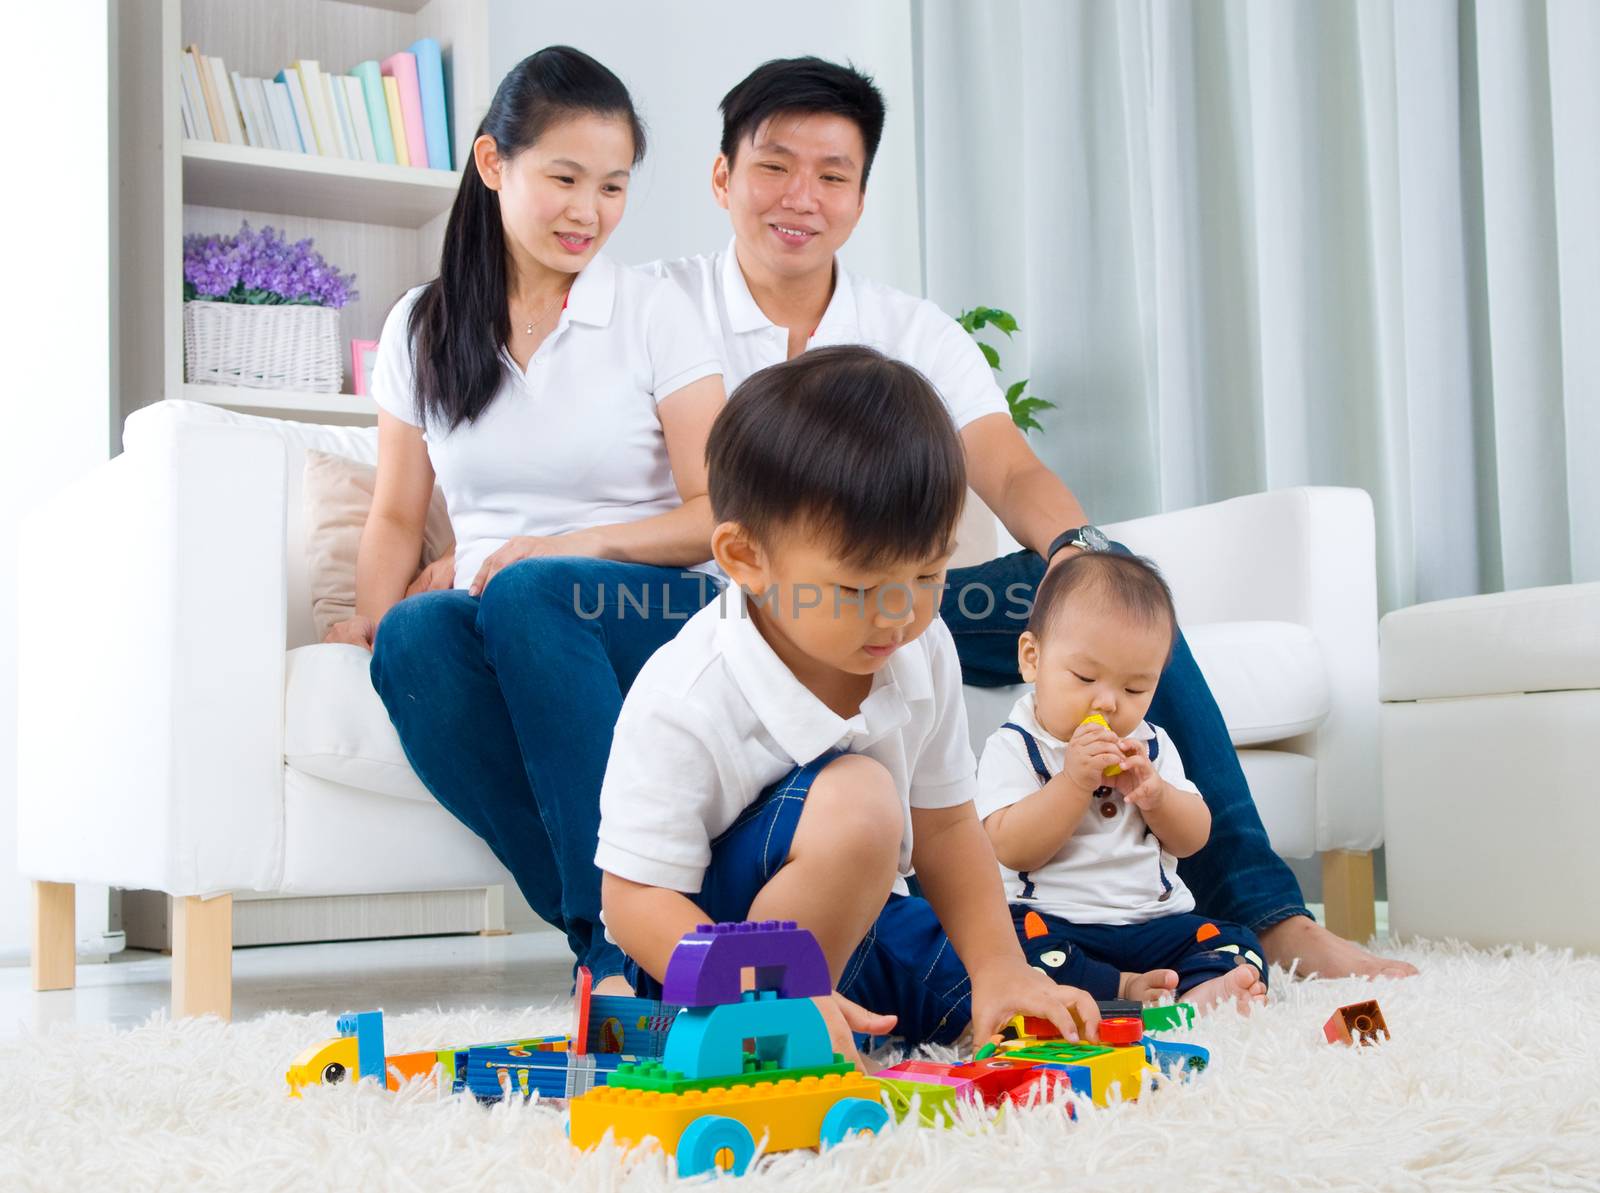 Candid lifestyle of asian family